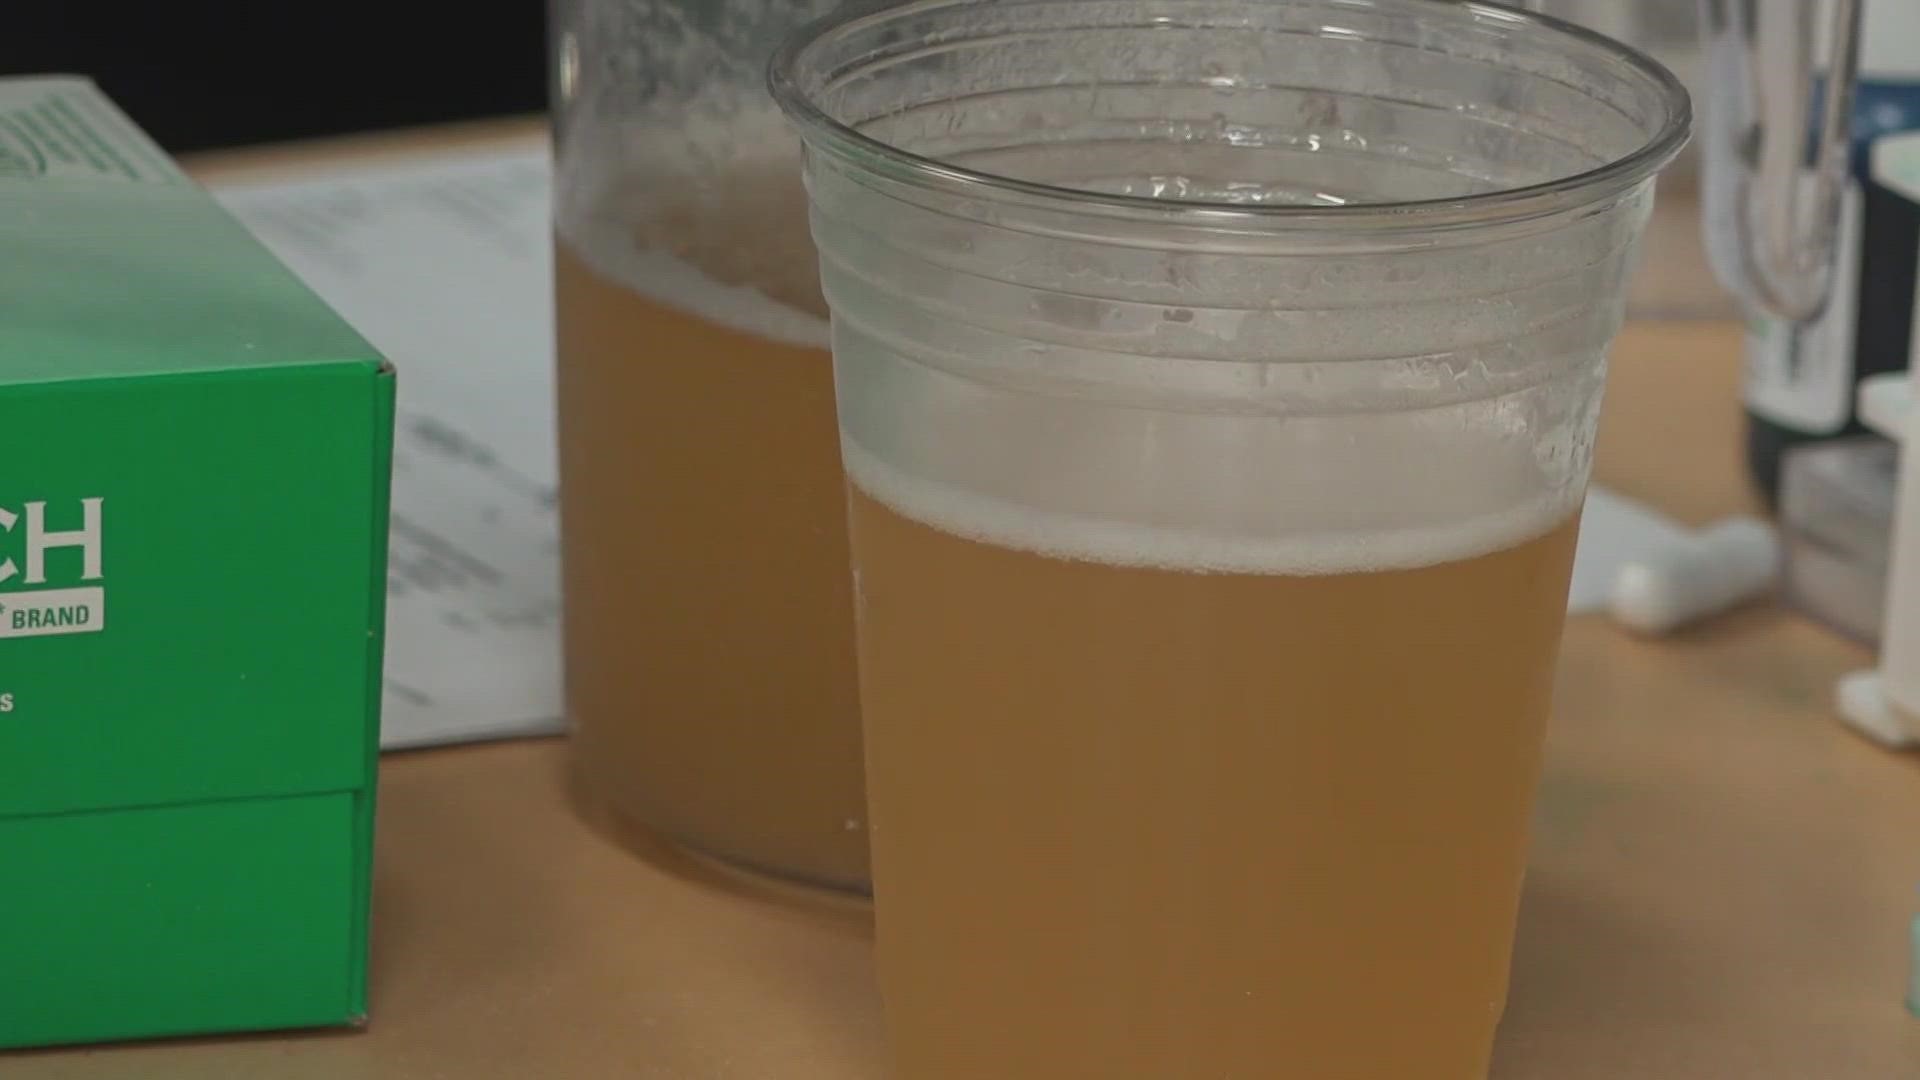 Rob Barrett and Will Fisher started KITnaBrewing to try and create a tasty craft beer without the alcohol.